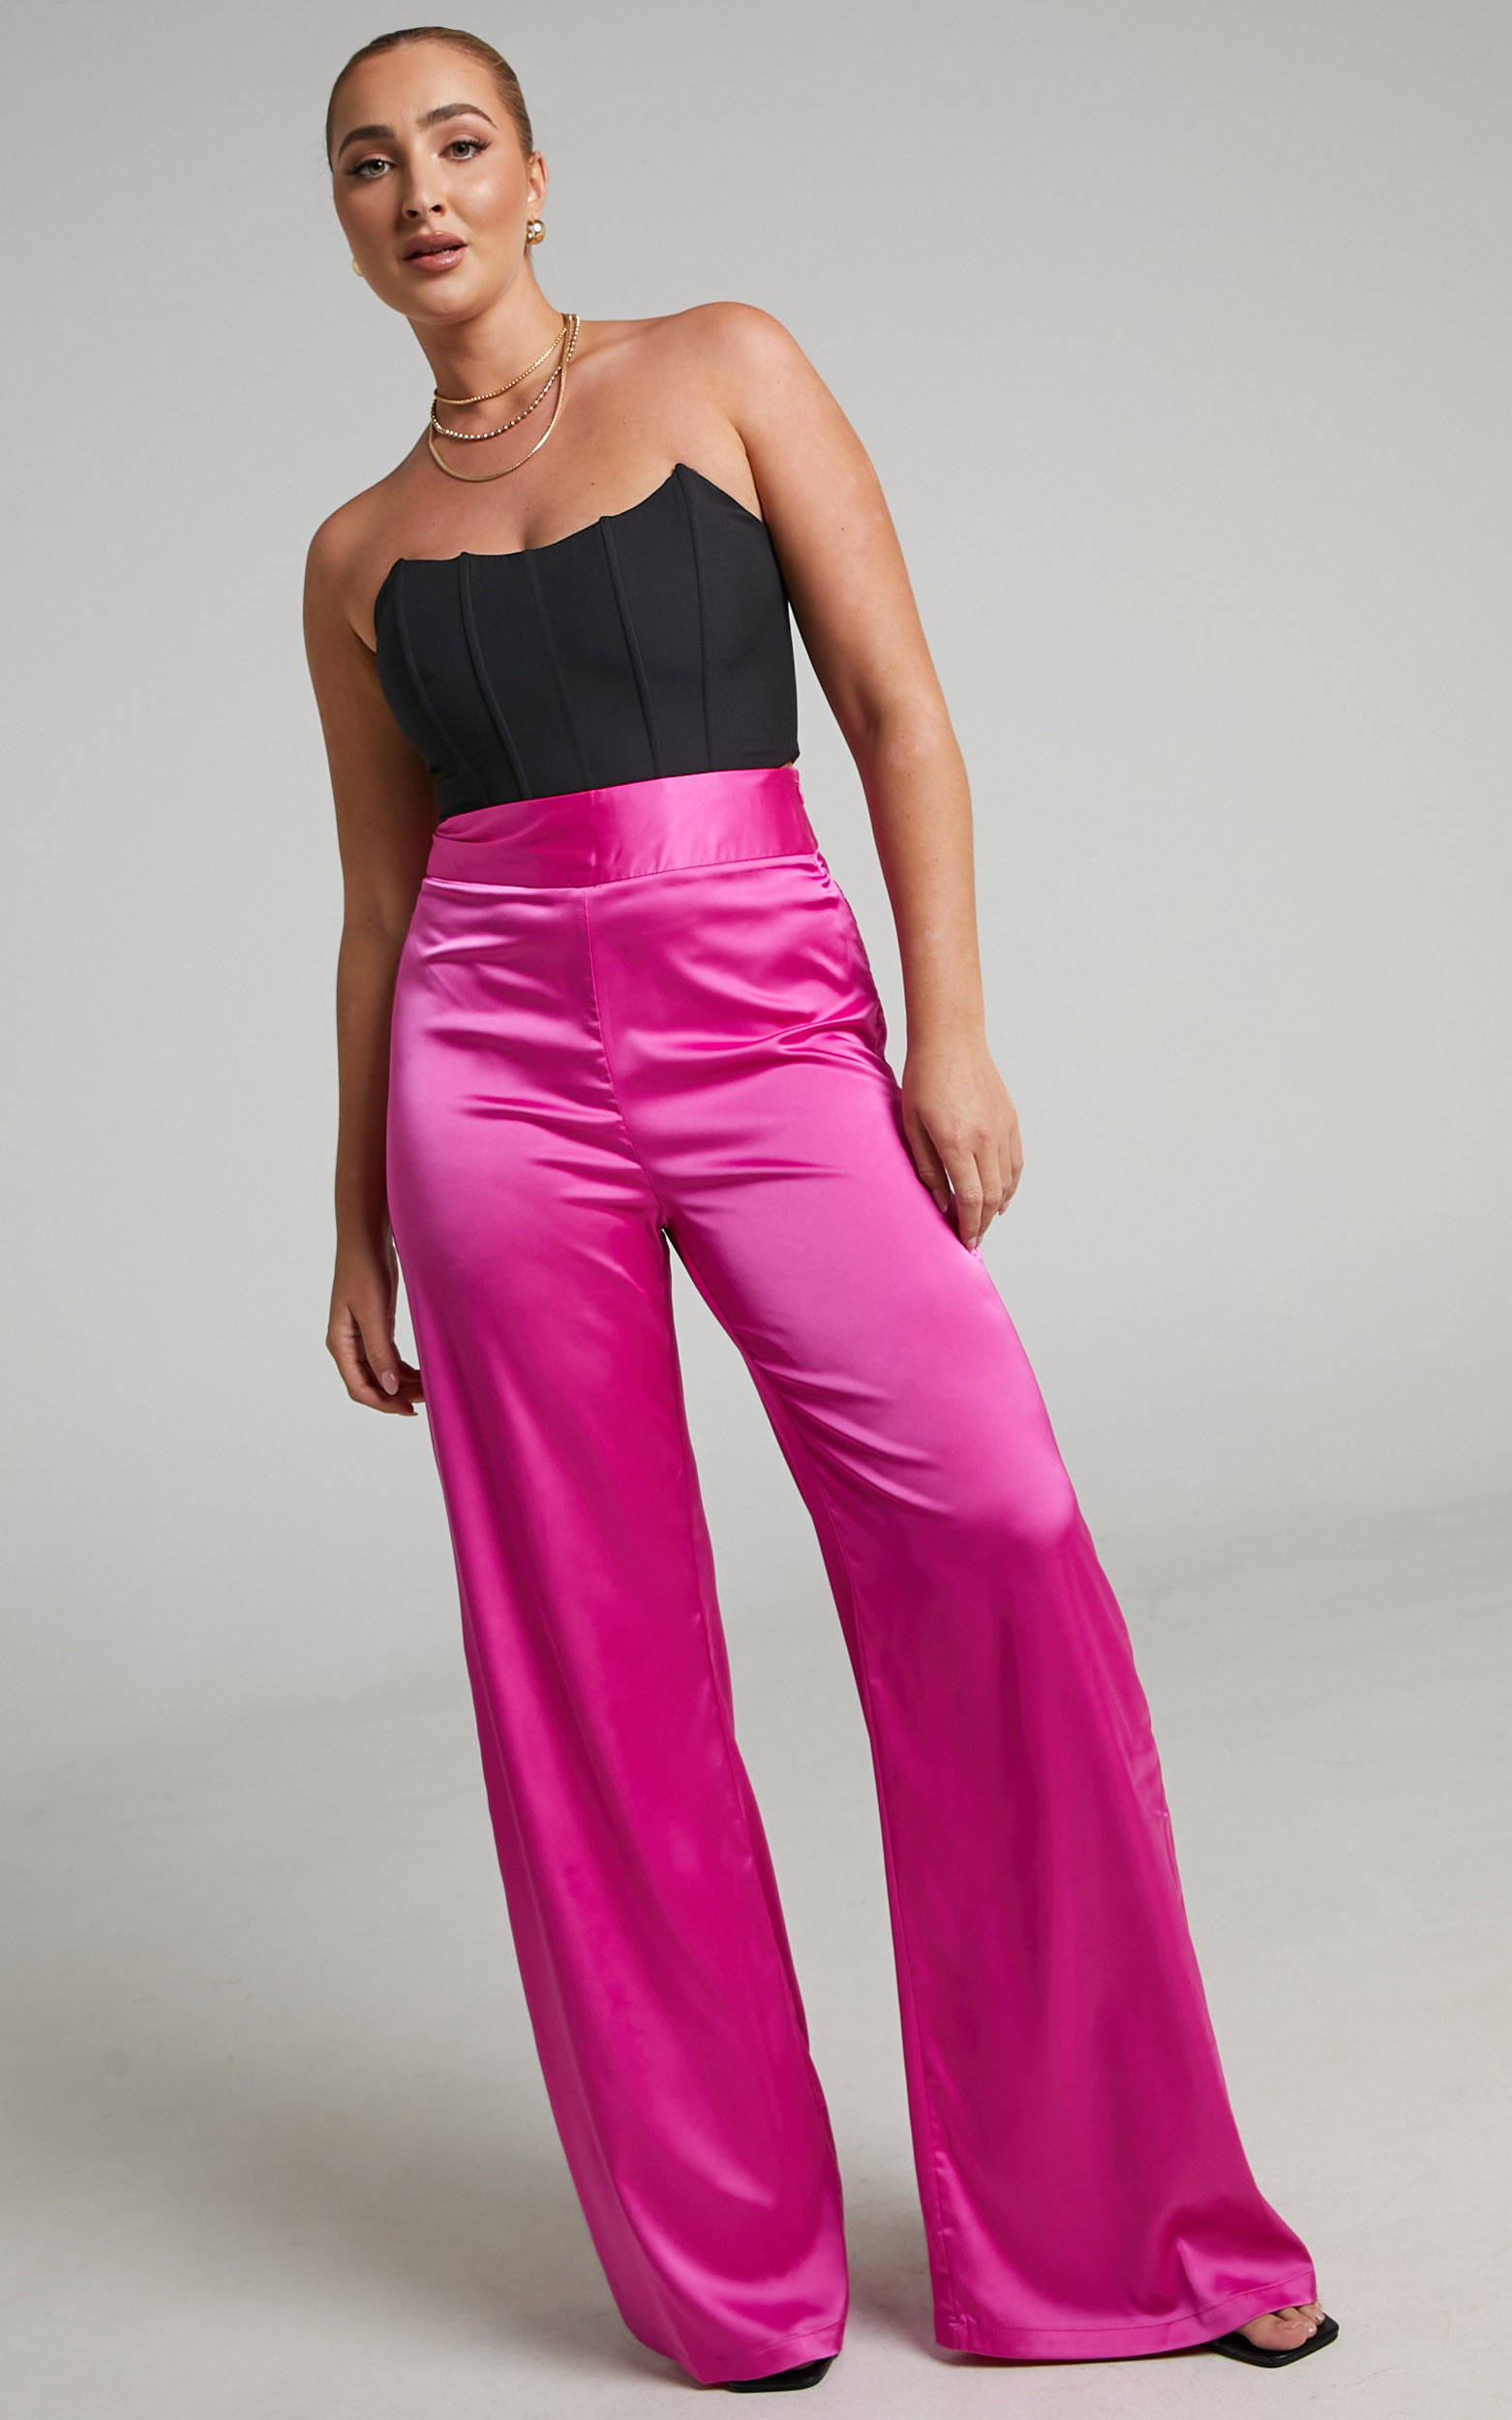 Kristelle High Waist Wide Leg Palazzo Pants in Hot Pink - 04, PNK1, hi-res image number null